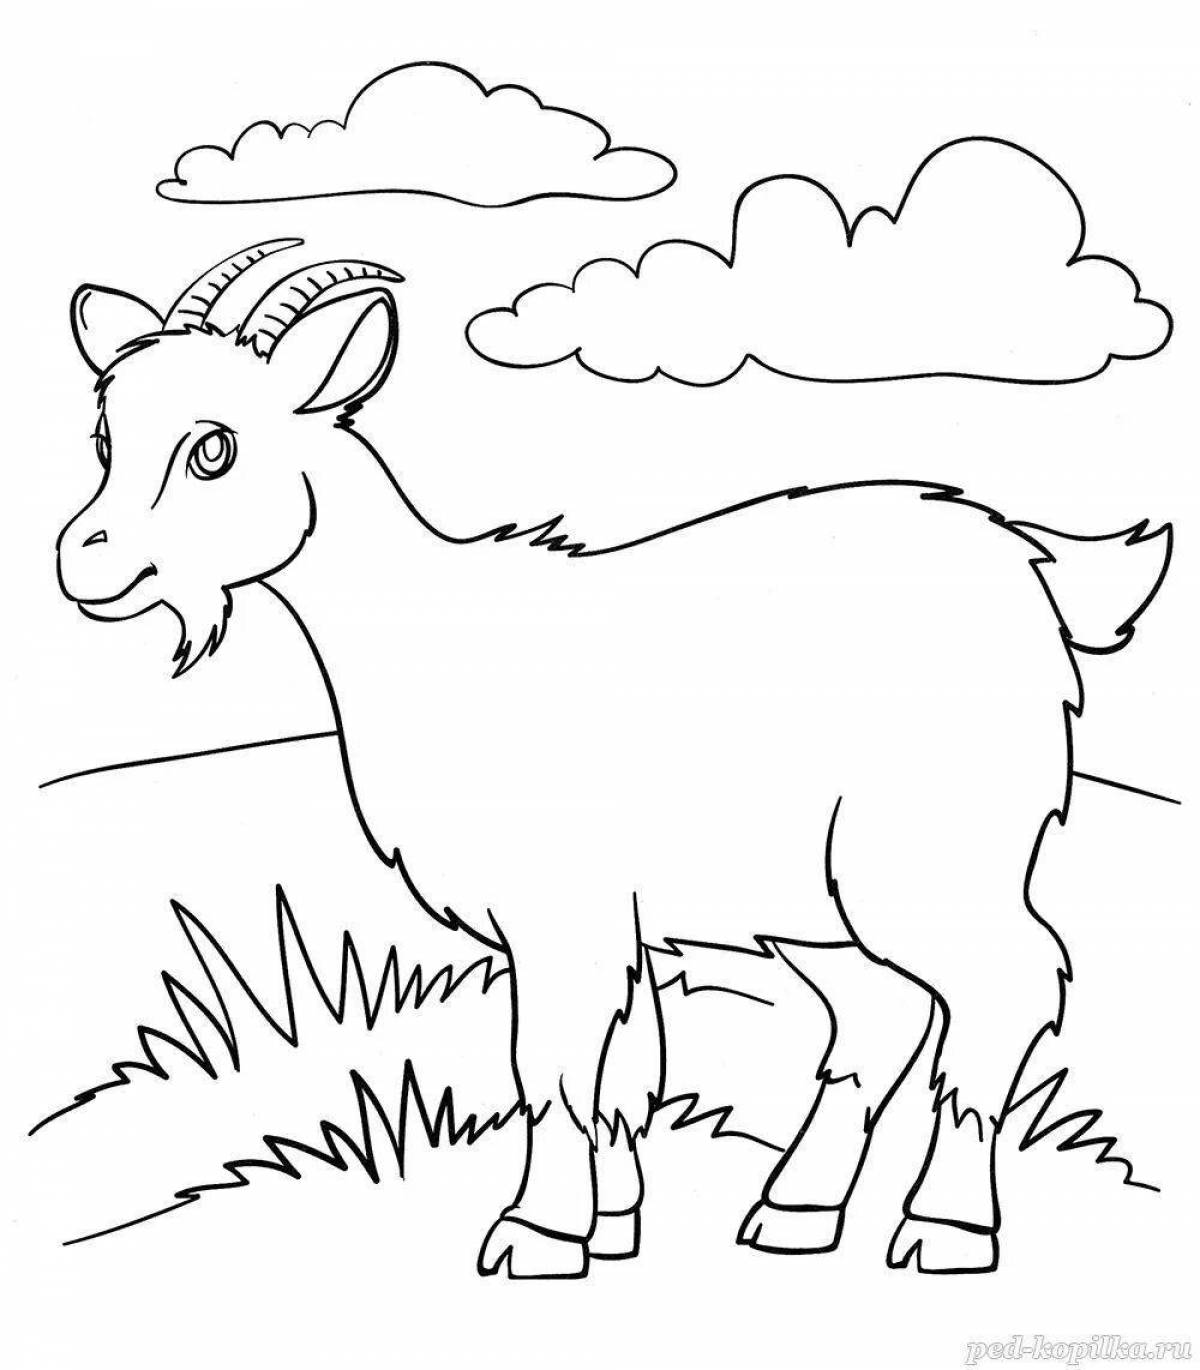 Colorful goat coloring page for 5-6 year olds